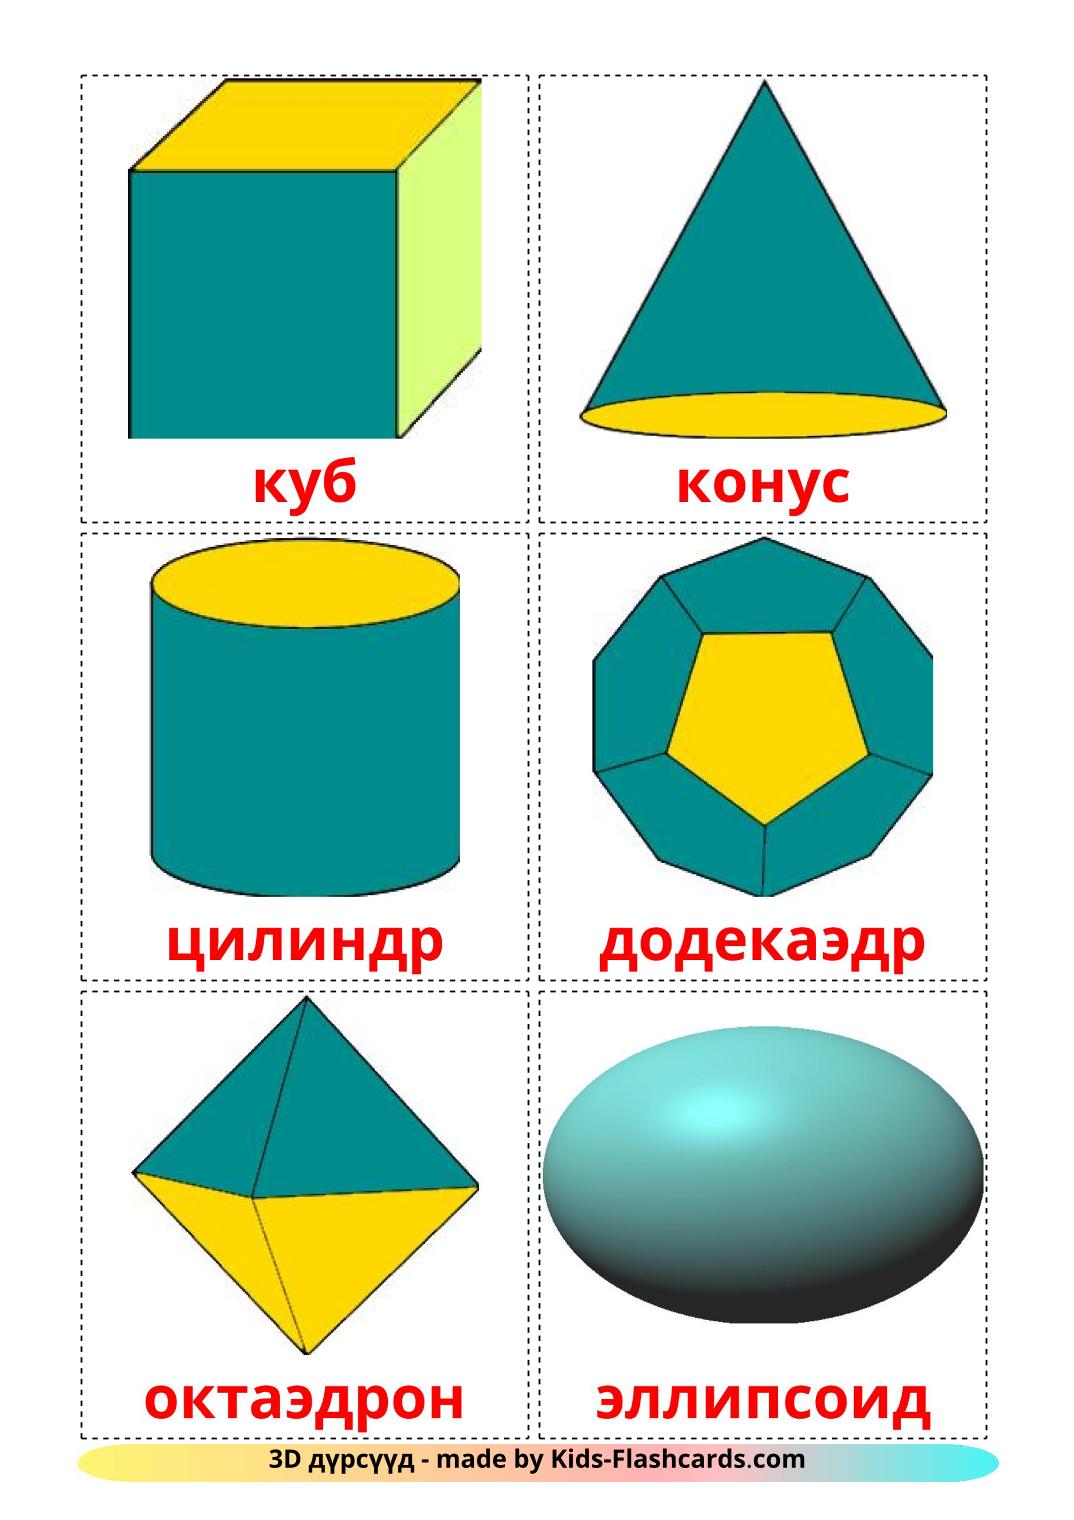 3D Shapes - 17 Free Printable mongolian Flashcards 